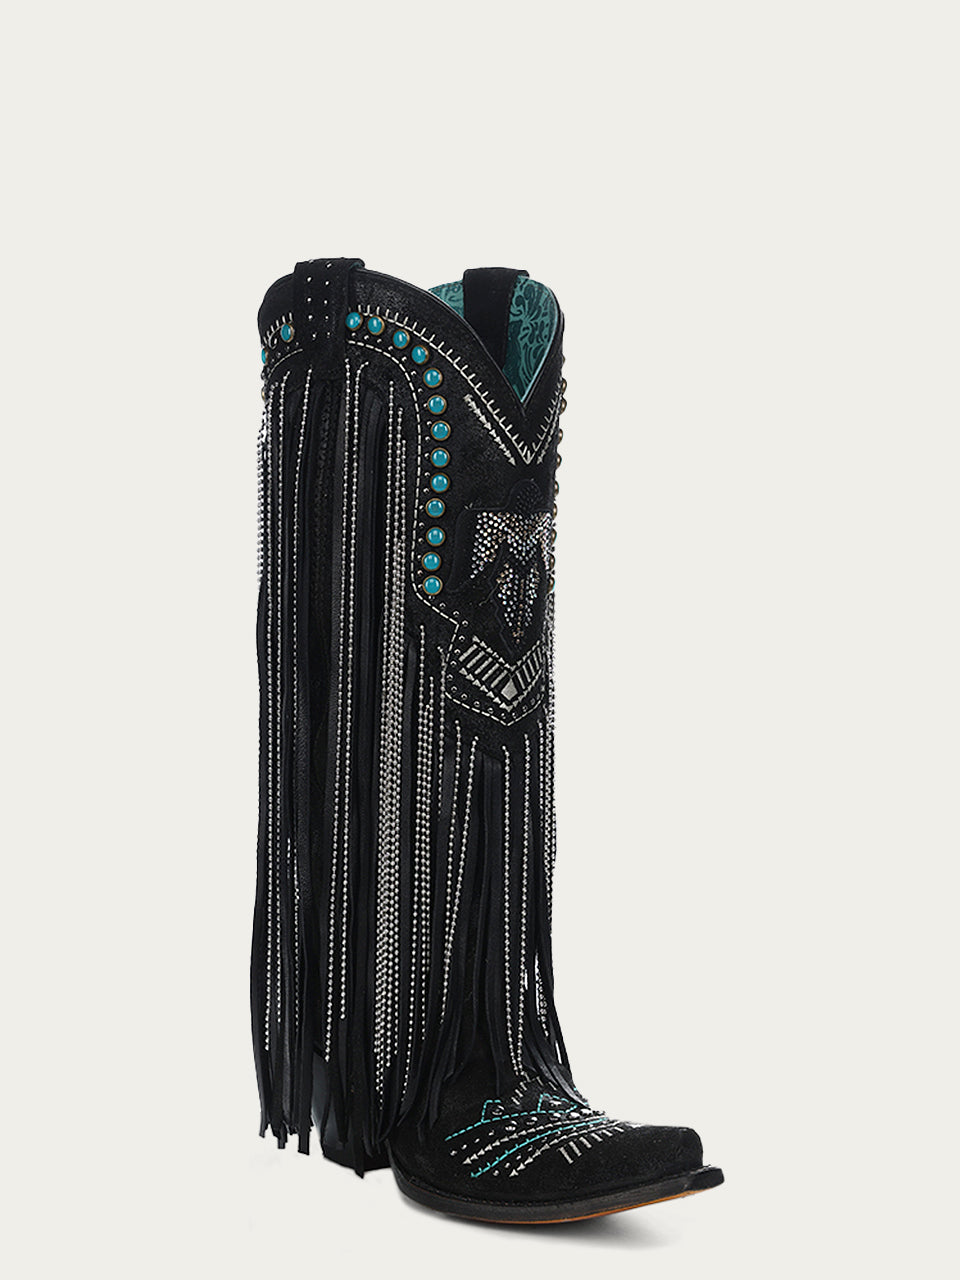 C4087 - WOMEN'S EMBROIDERY EAGLE WITH LAMB AND CRYSTALS FRINGE WITH STUDS SNIP TOE COWBOY BOOT